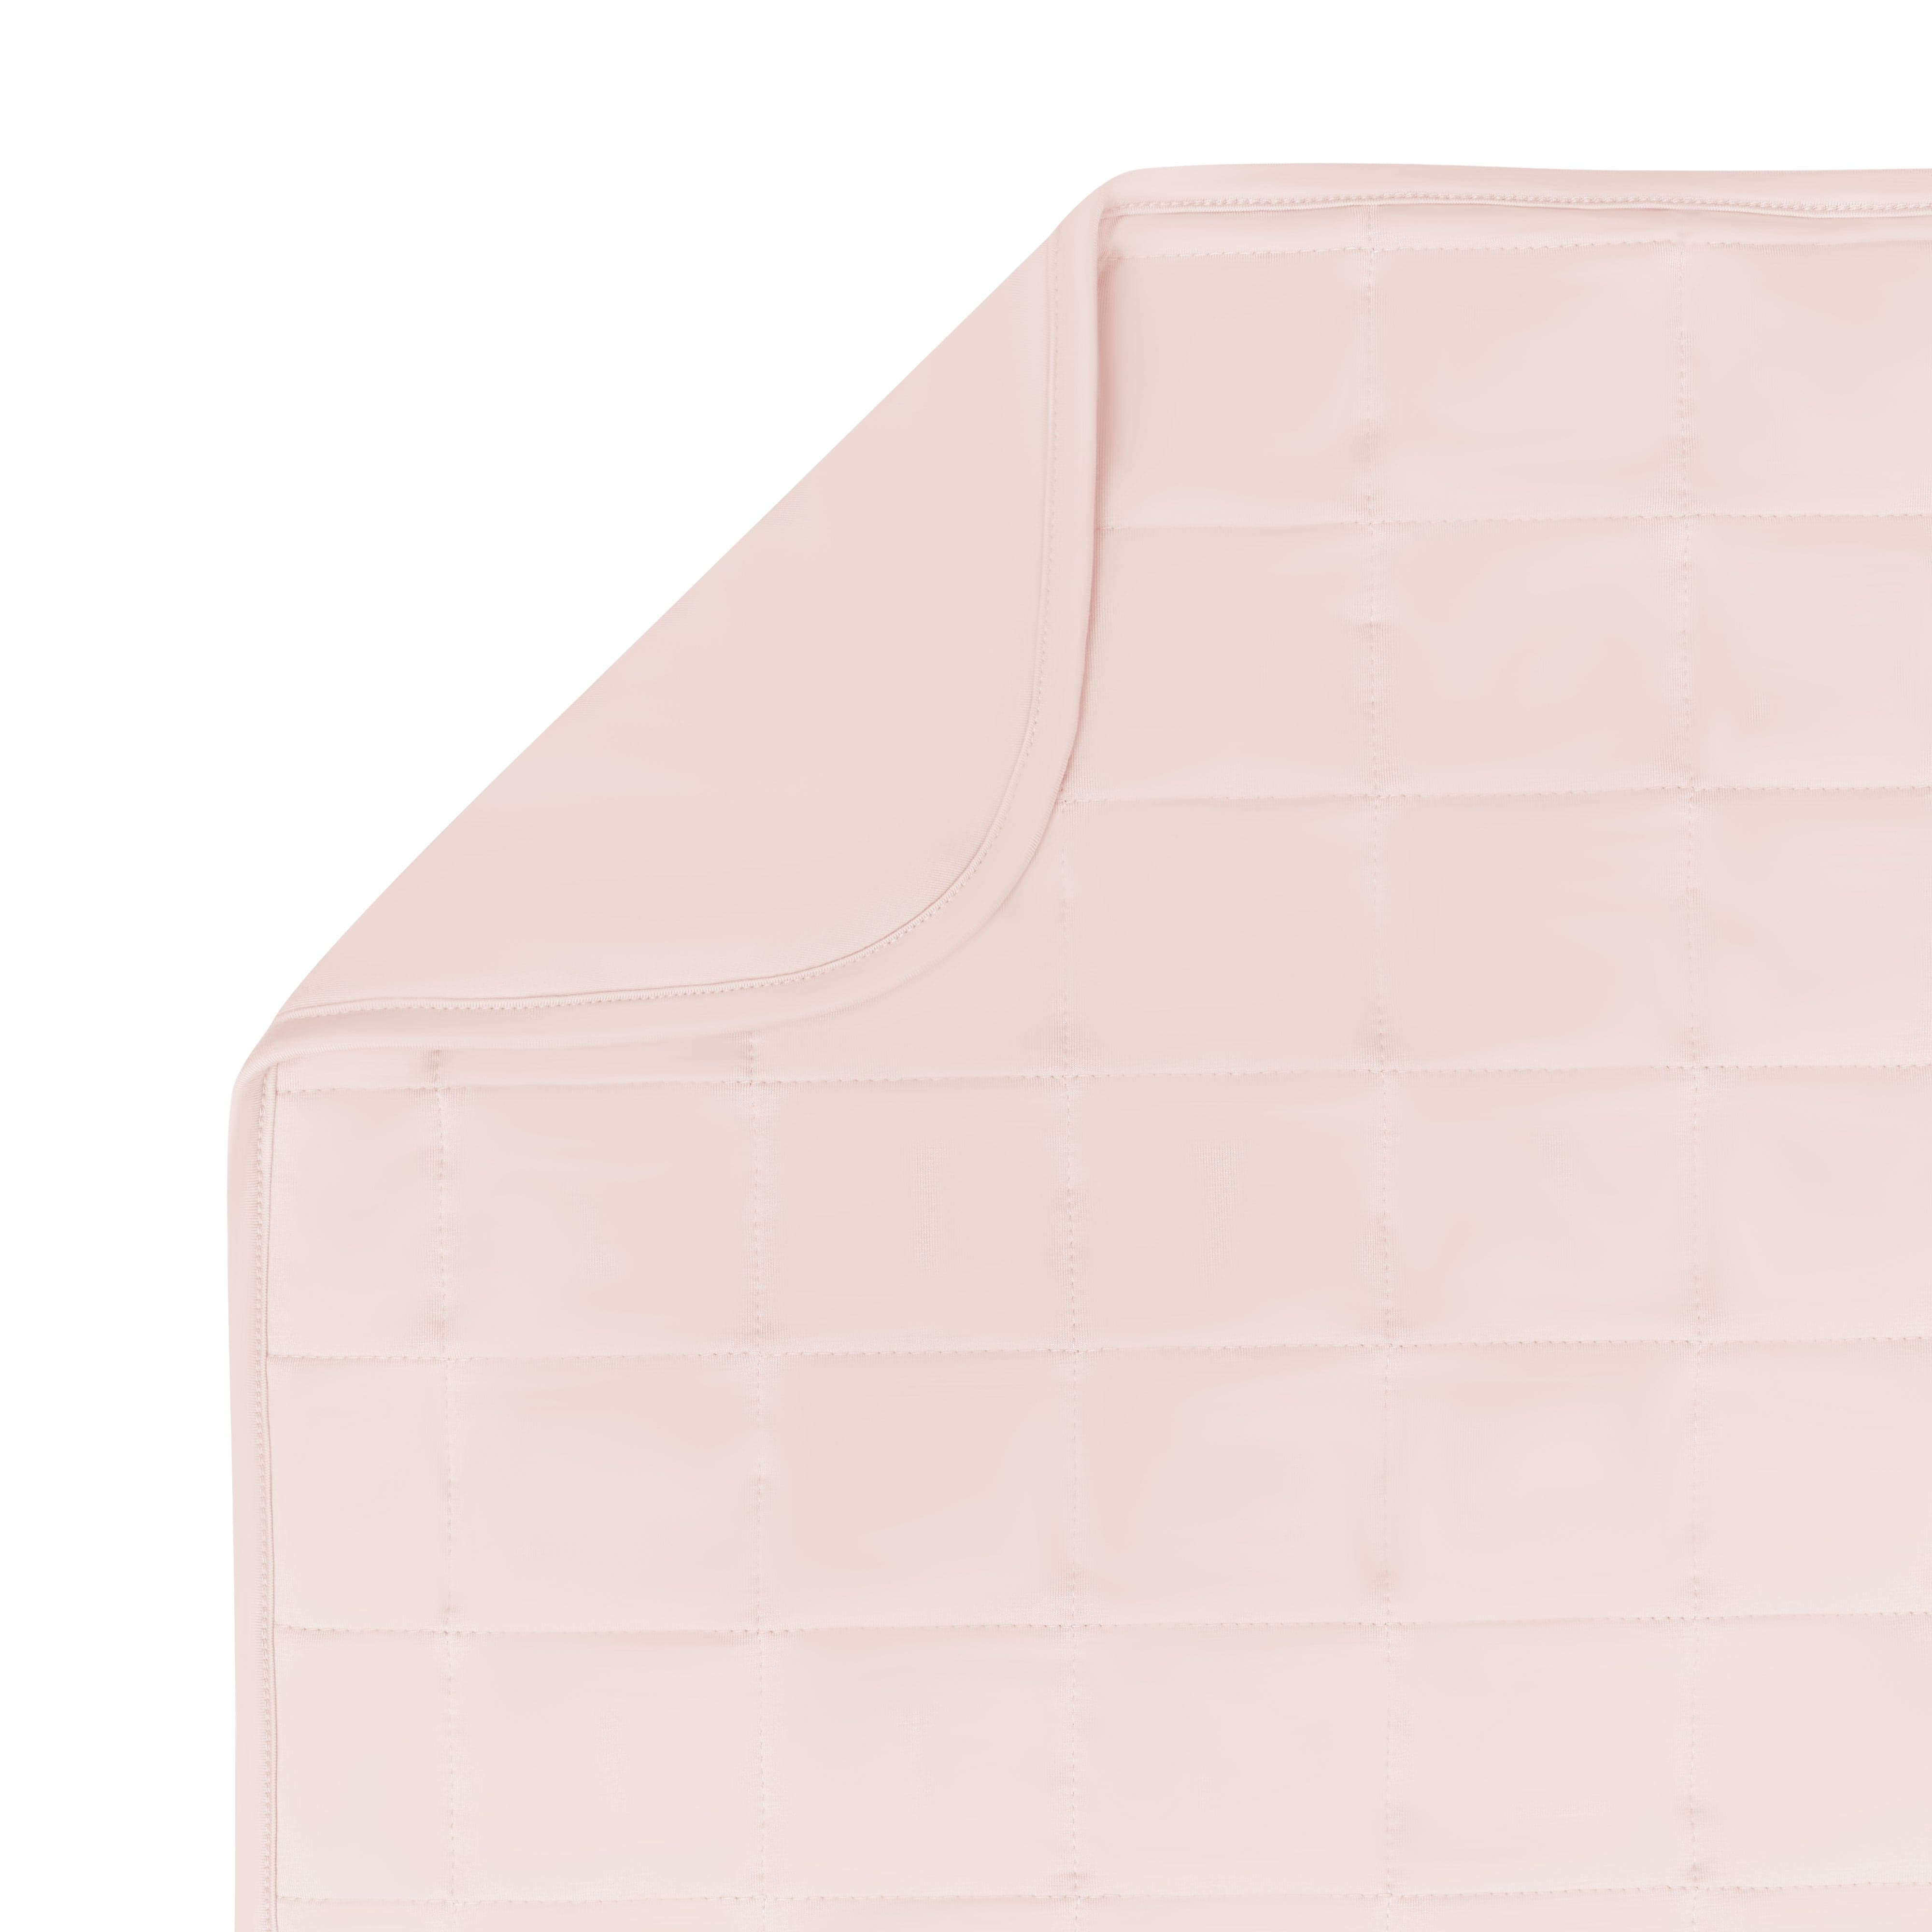 Kyte BABY Adult Blanket Blush / Adult Adult Quilted Blanket in Blush 2.5